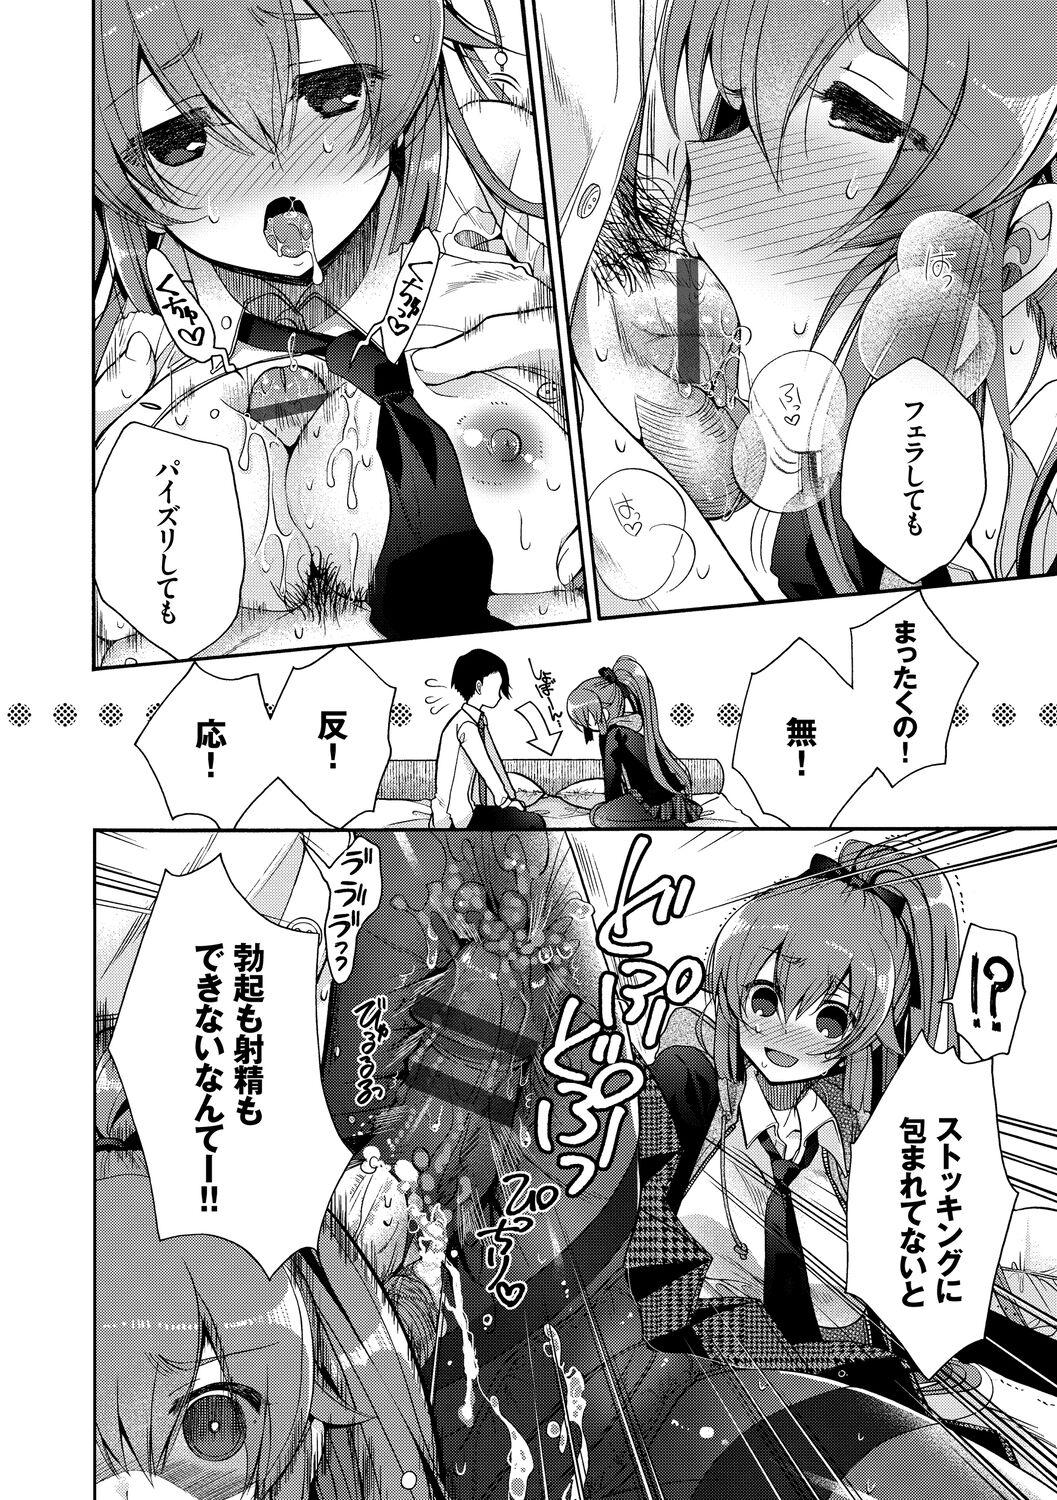 Hatsukoi Melty - Melty First Love 77